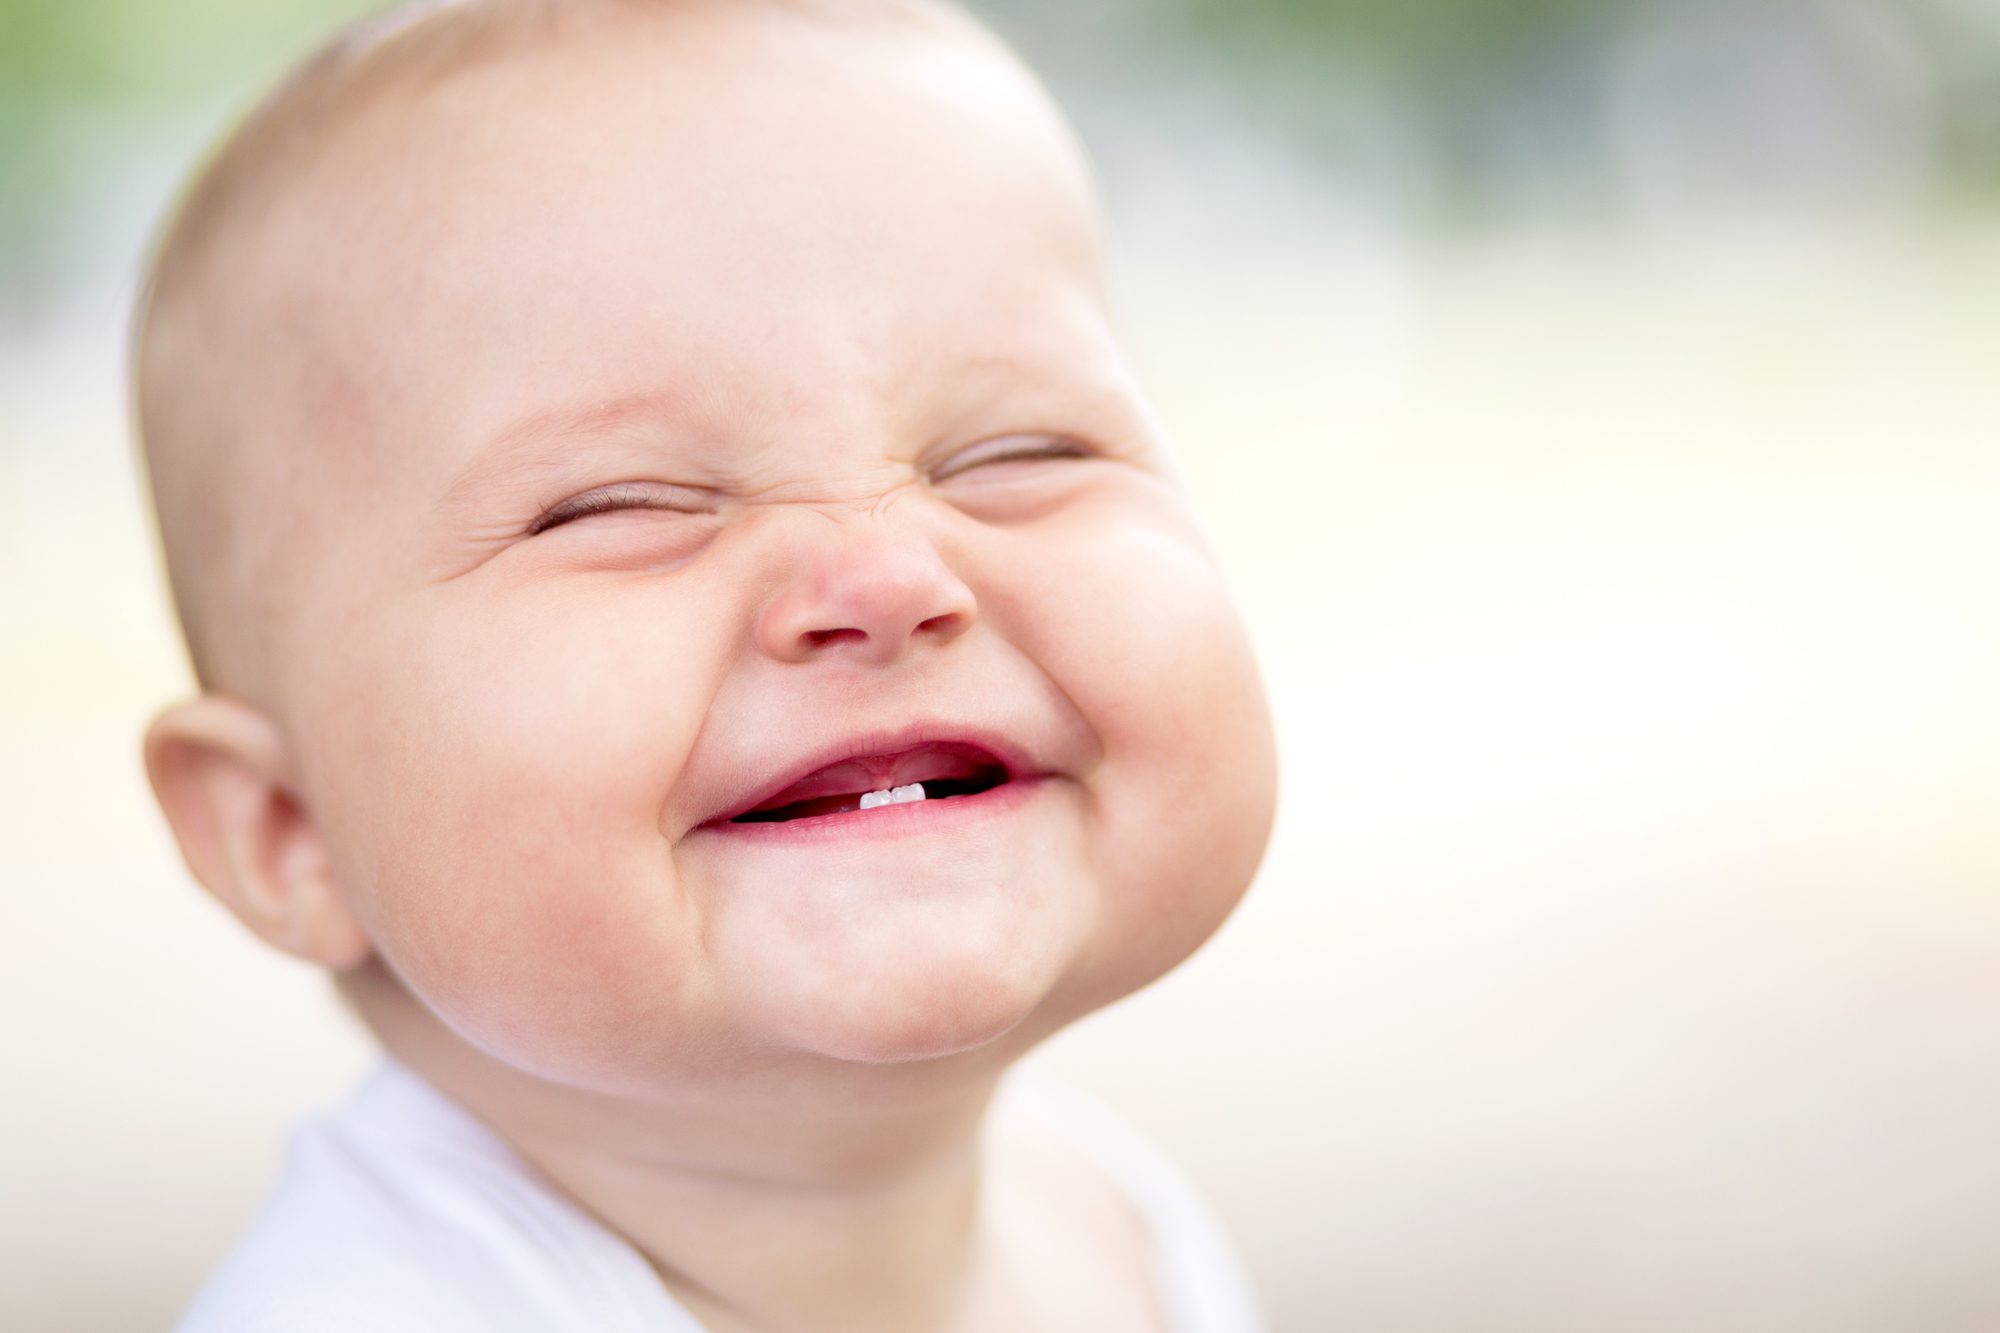 cute baby smiling with two baby teeth